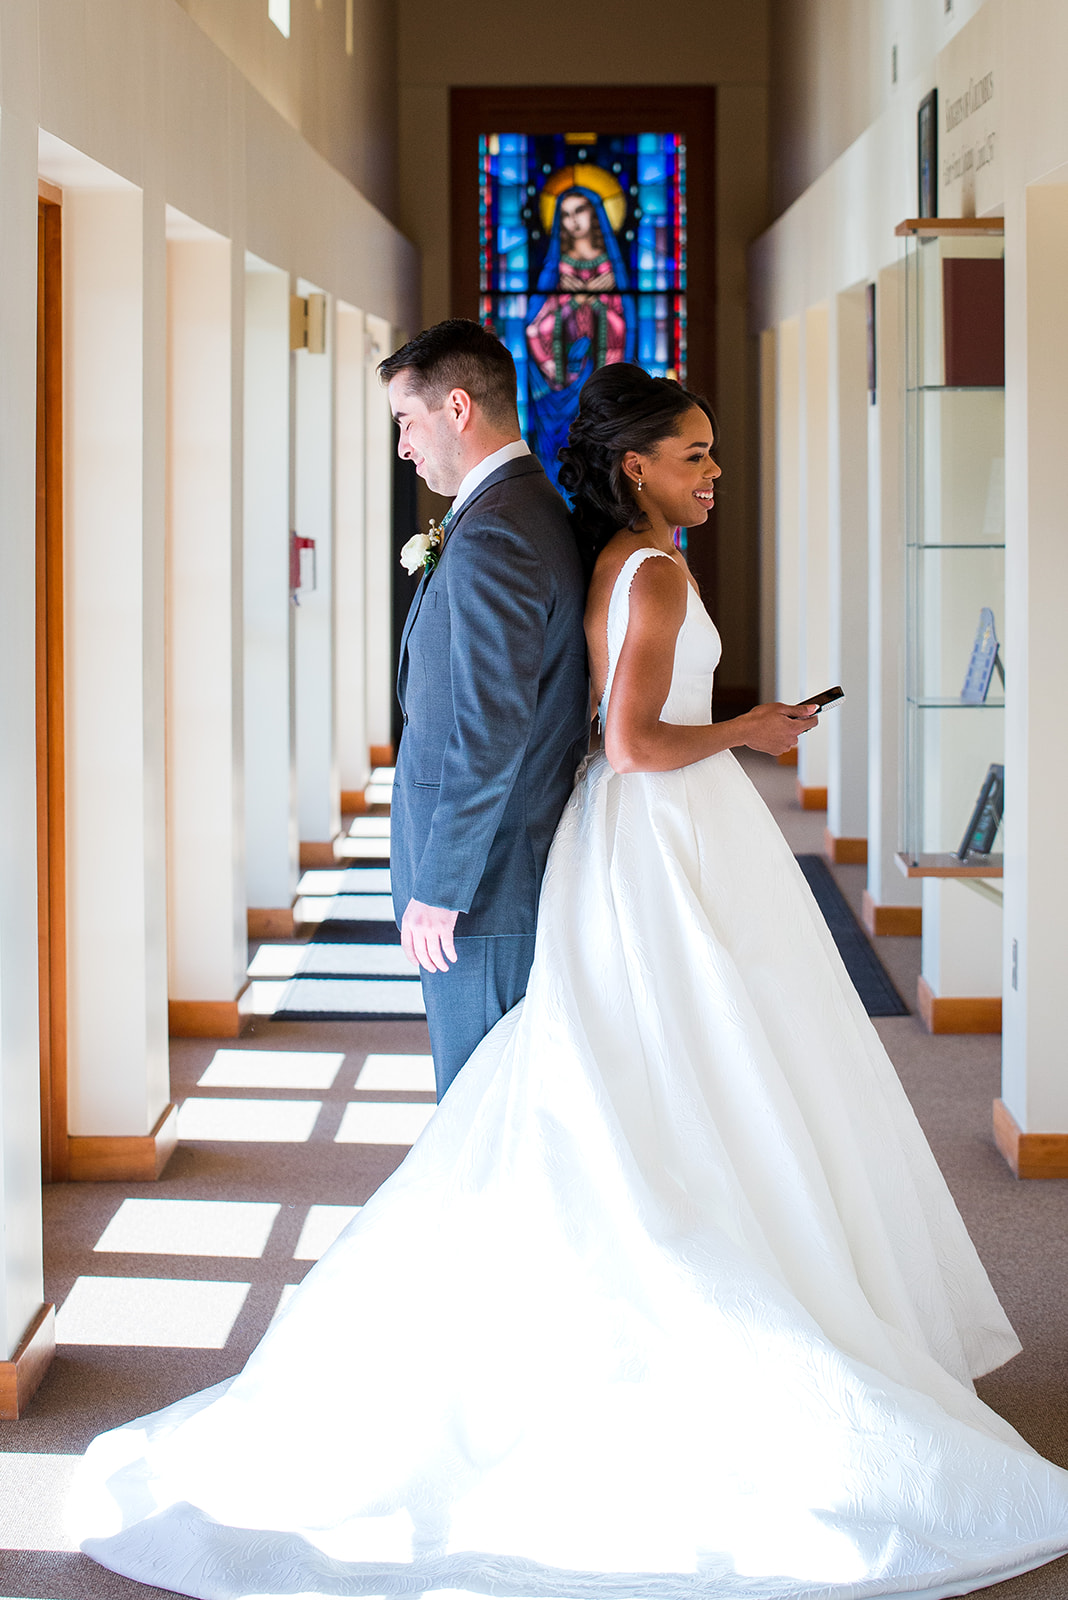 Bride and groom stand back to back in the hallway of the church, sharing a first touch and vows.